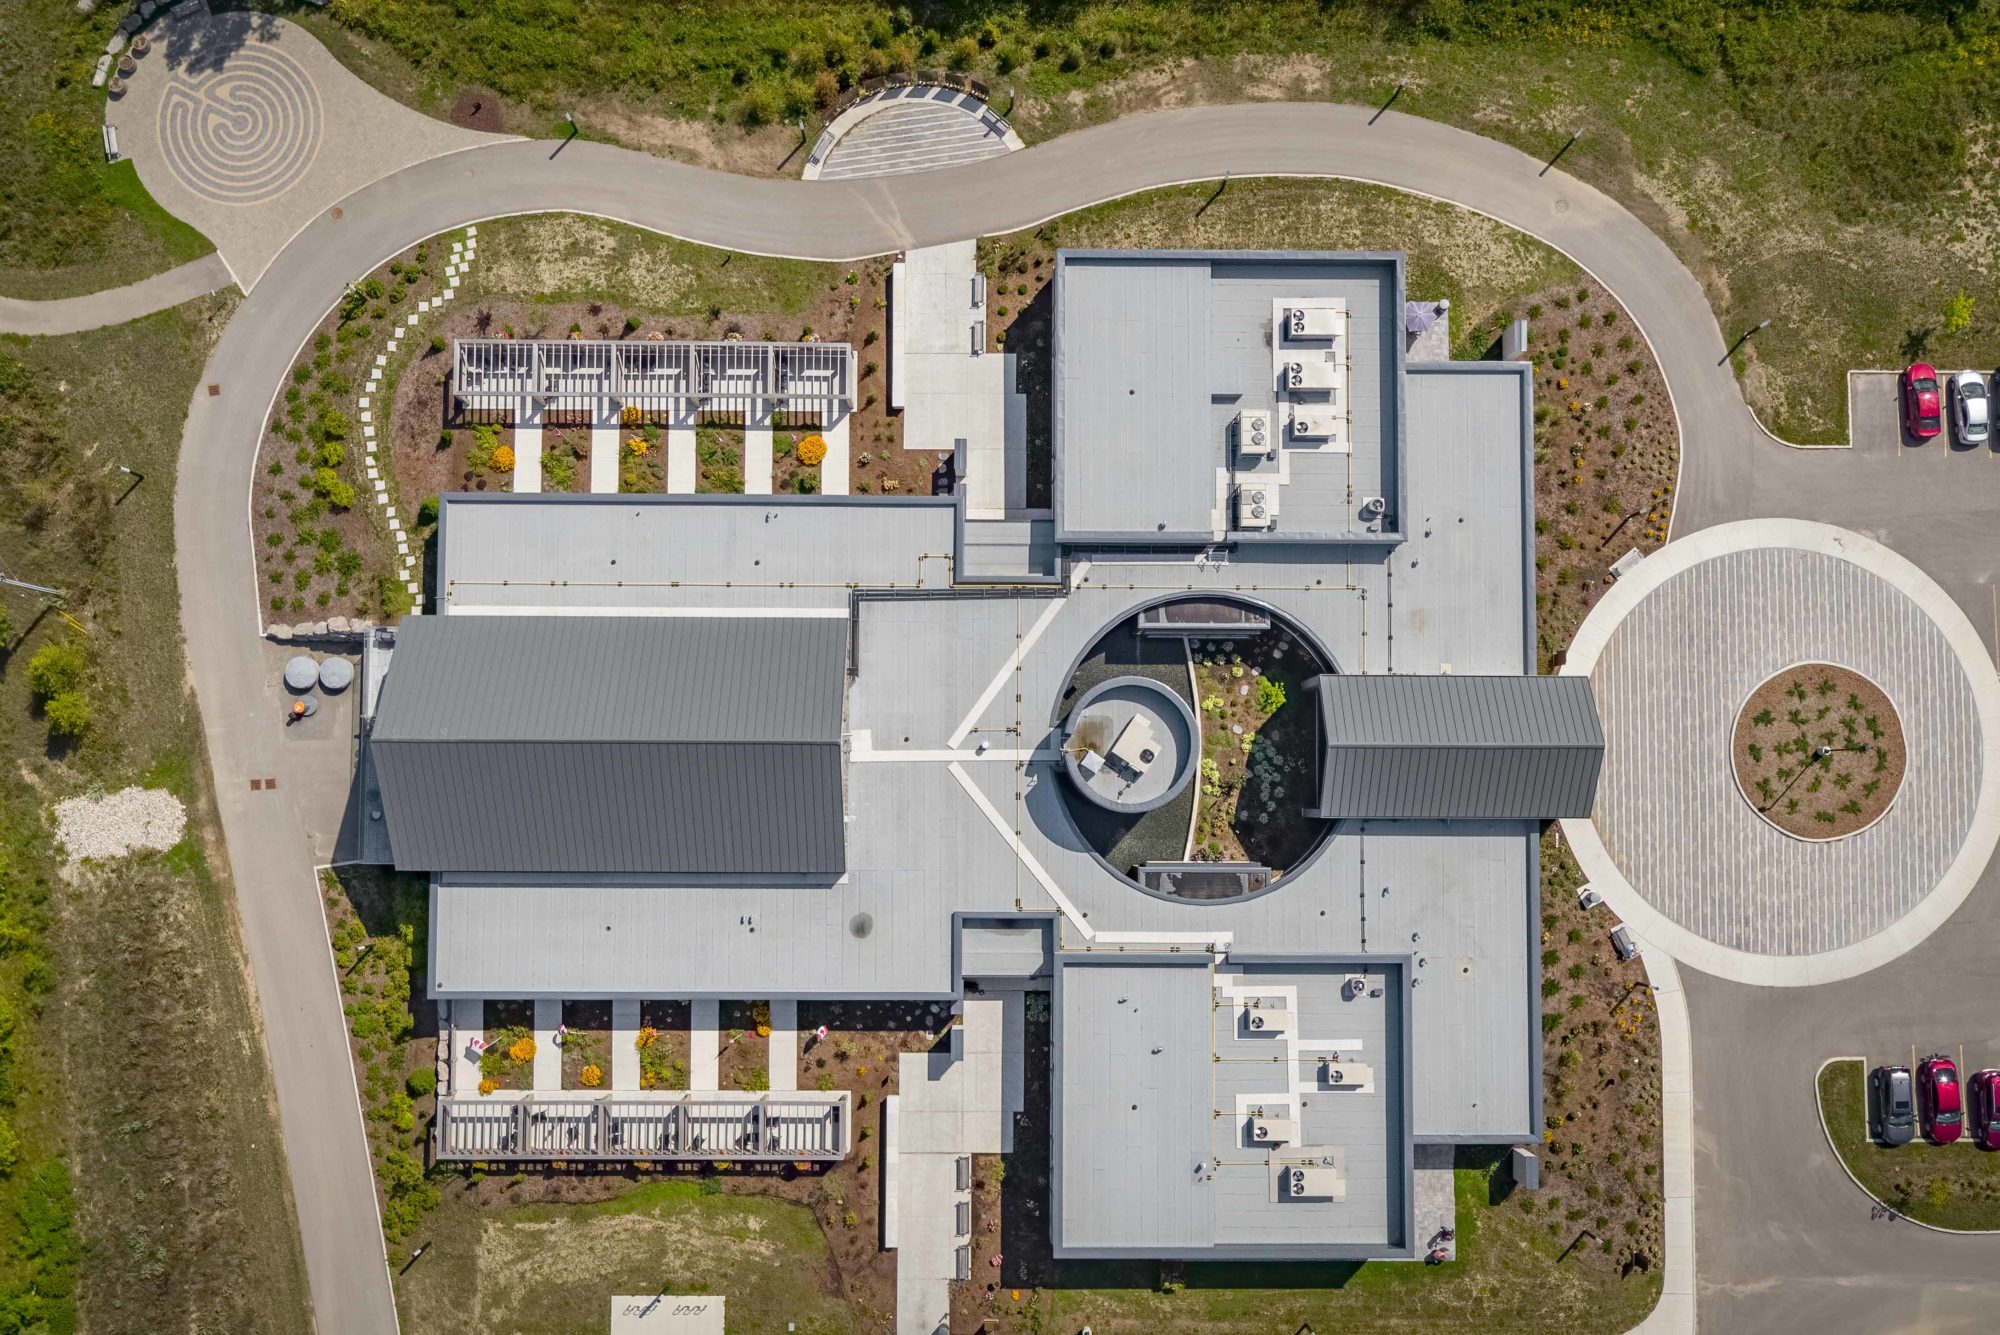 Bird’s eye view of the Hospice Waterloo Region building and the surrounding landscape